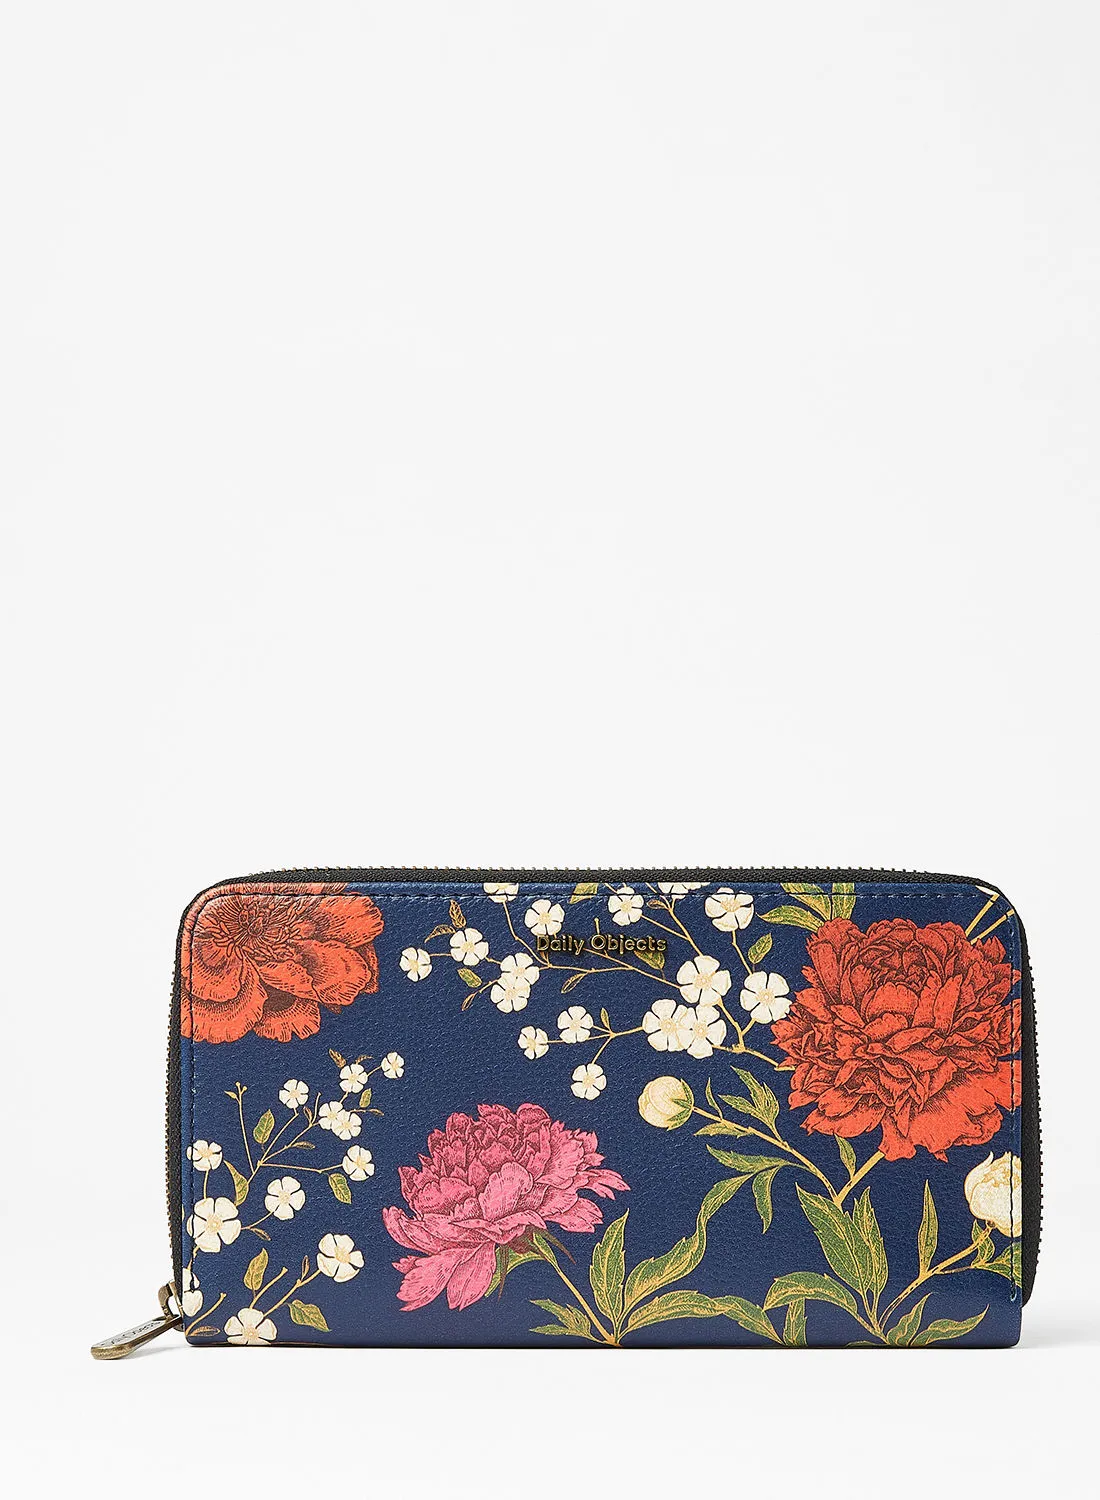 DailyObjects Midnight Chrysanthemums Classic Wallet Navy Multi